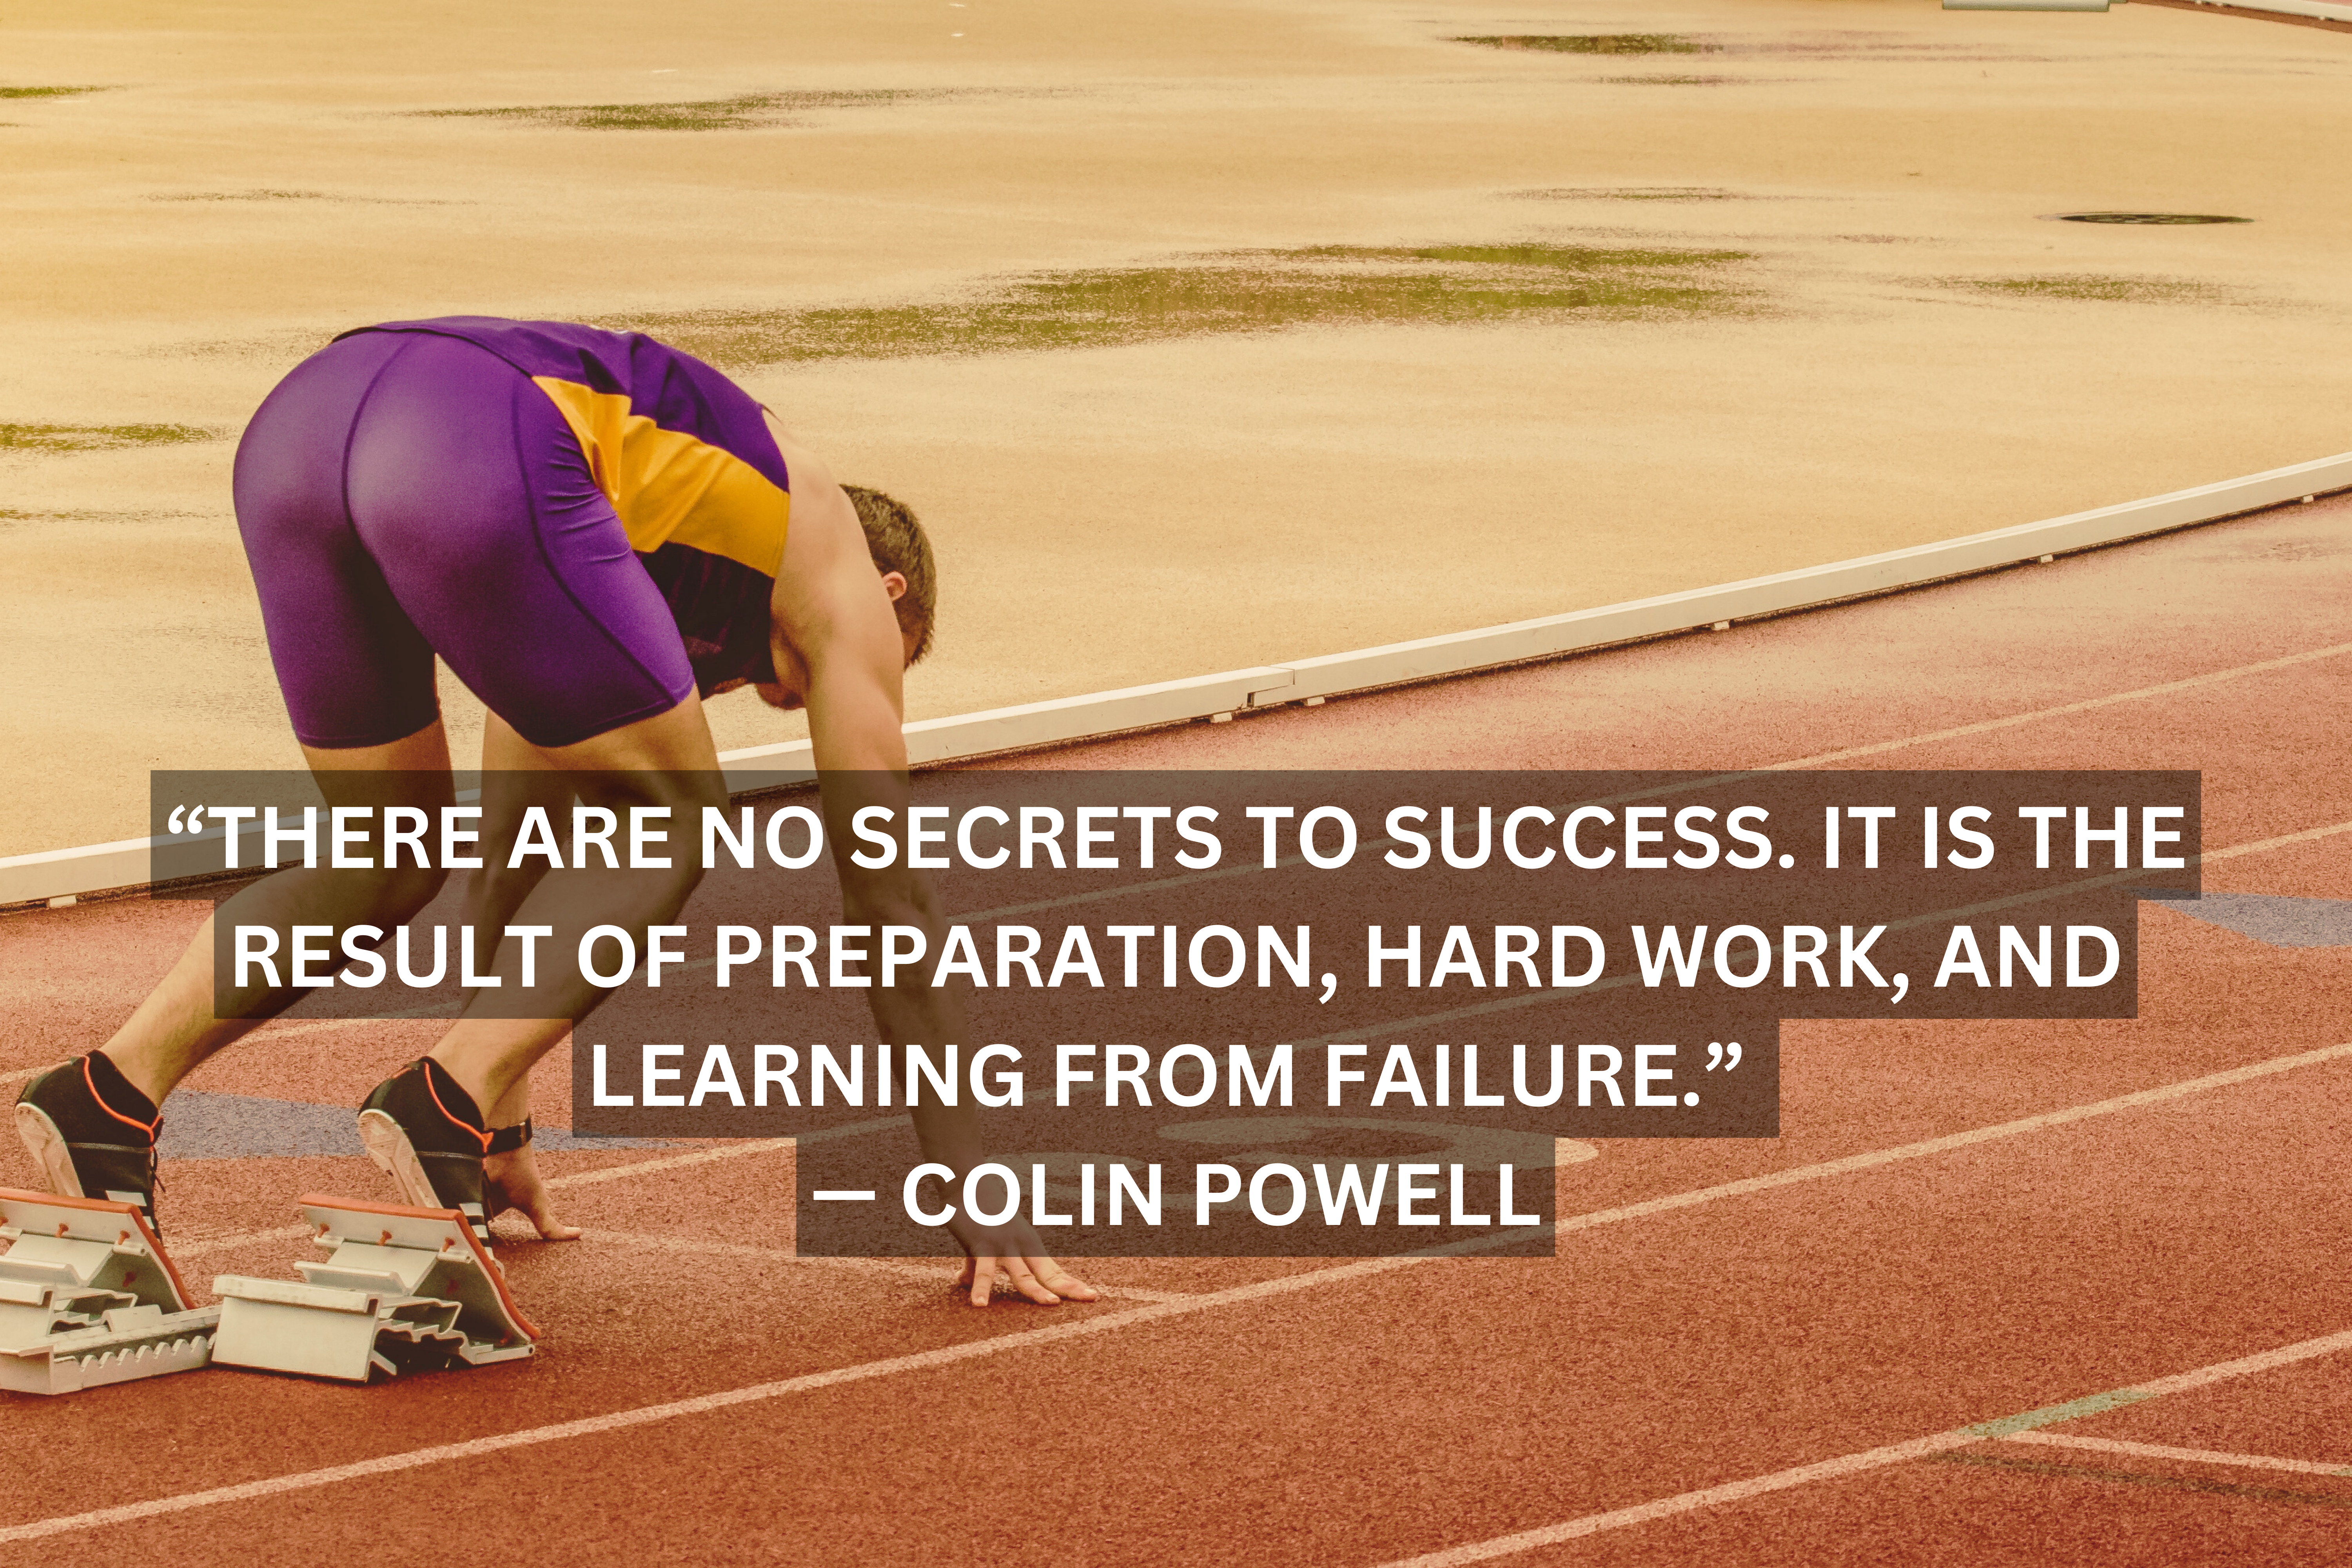 There are no secrets to success. It is the result of preparation, hard work, and learning from failure - Hope and Belief.